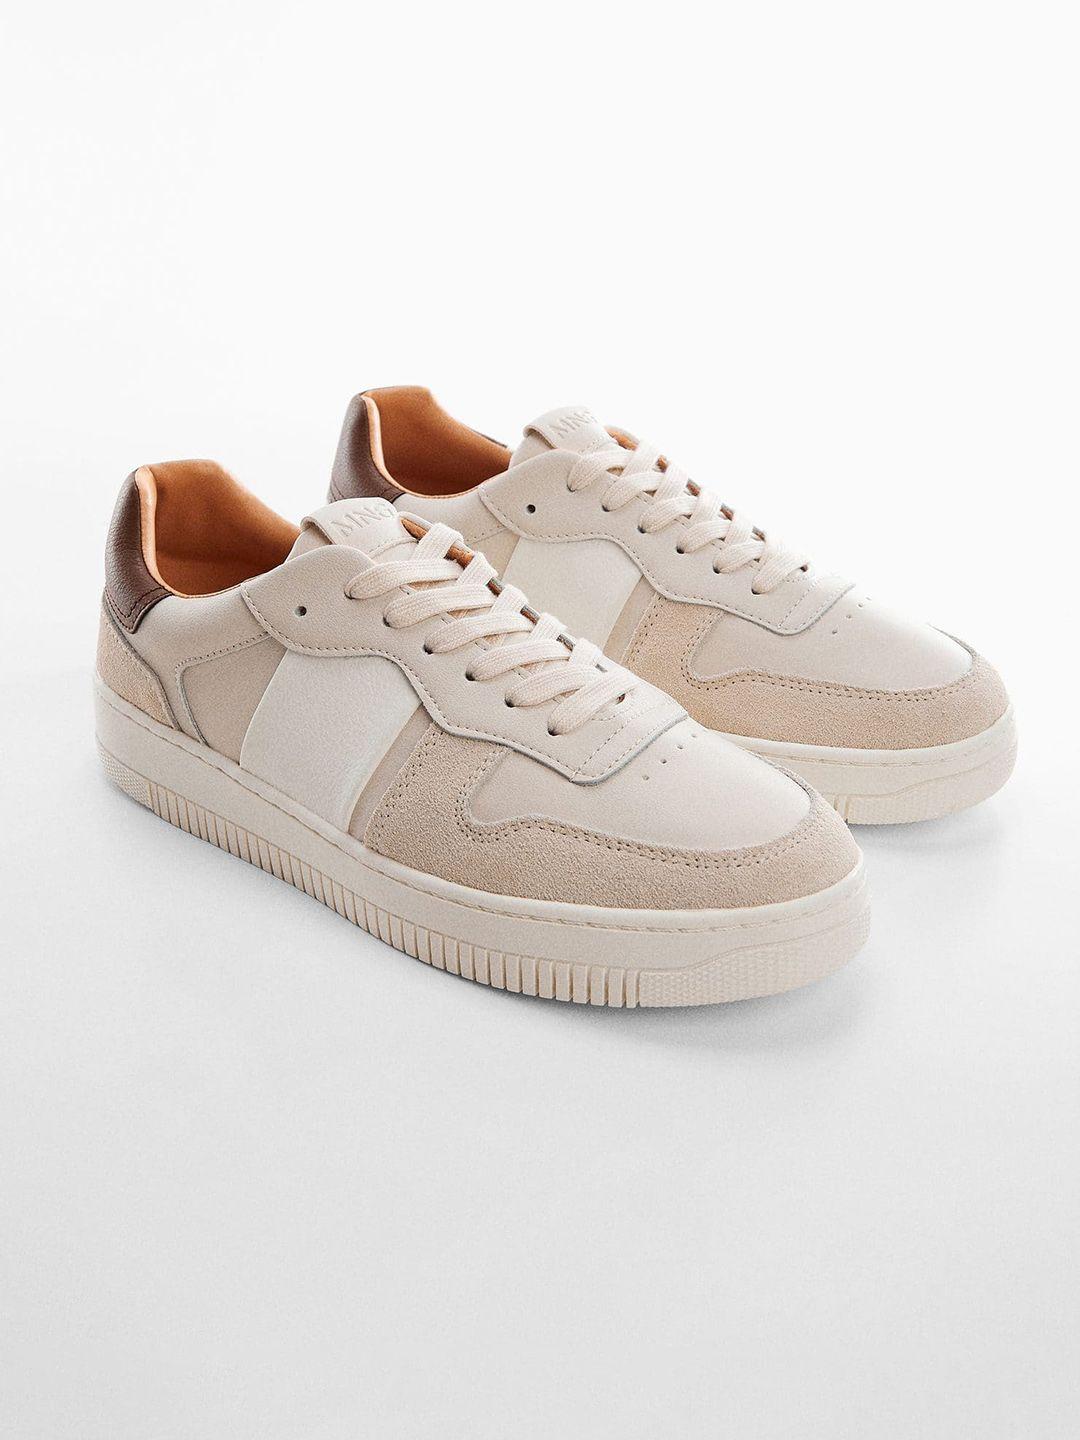 mango-man-leather-sustainable-sneakers